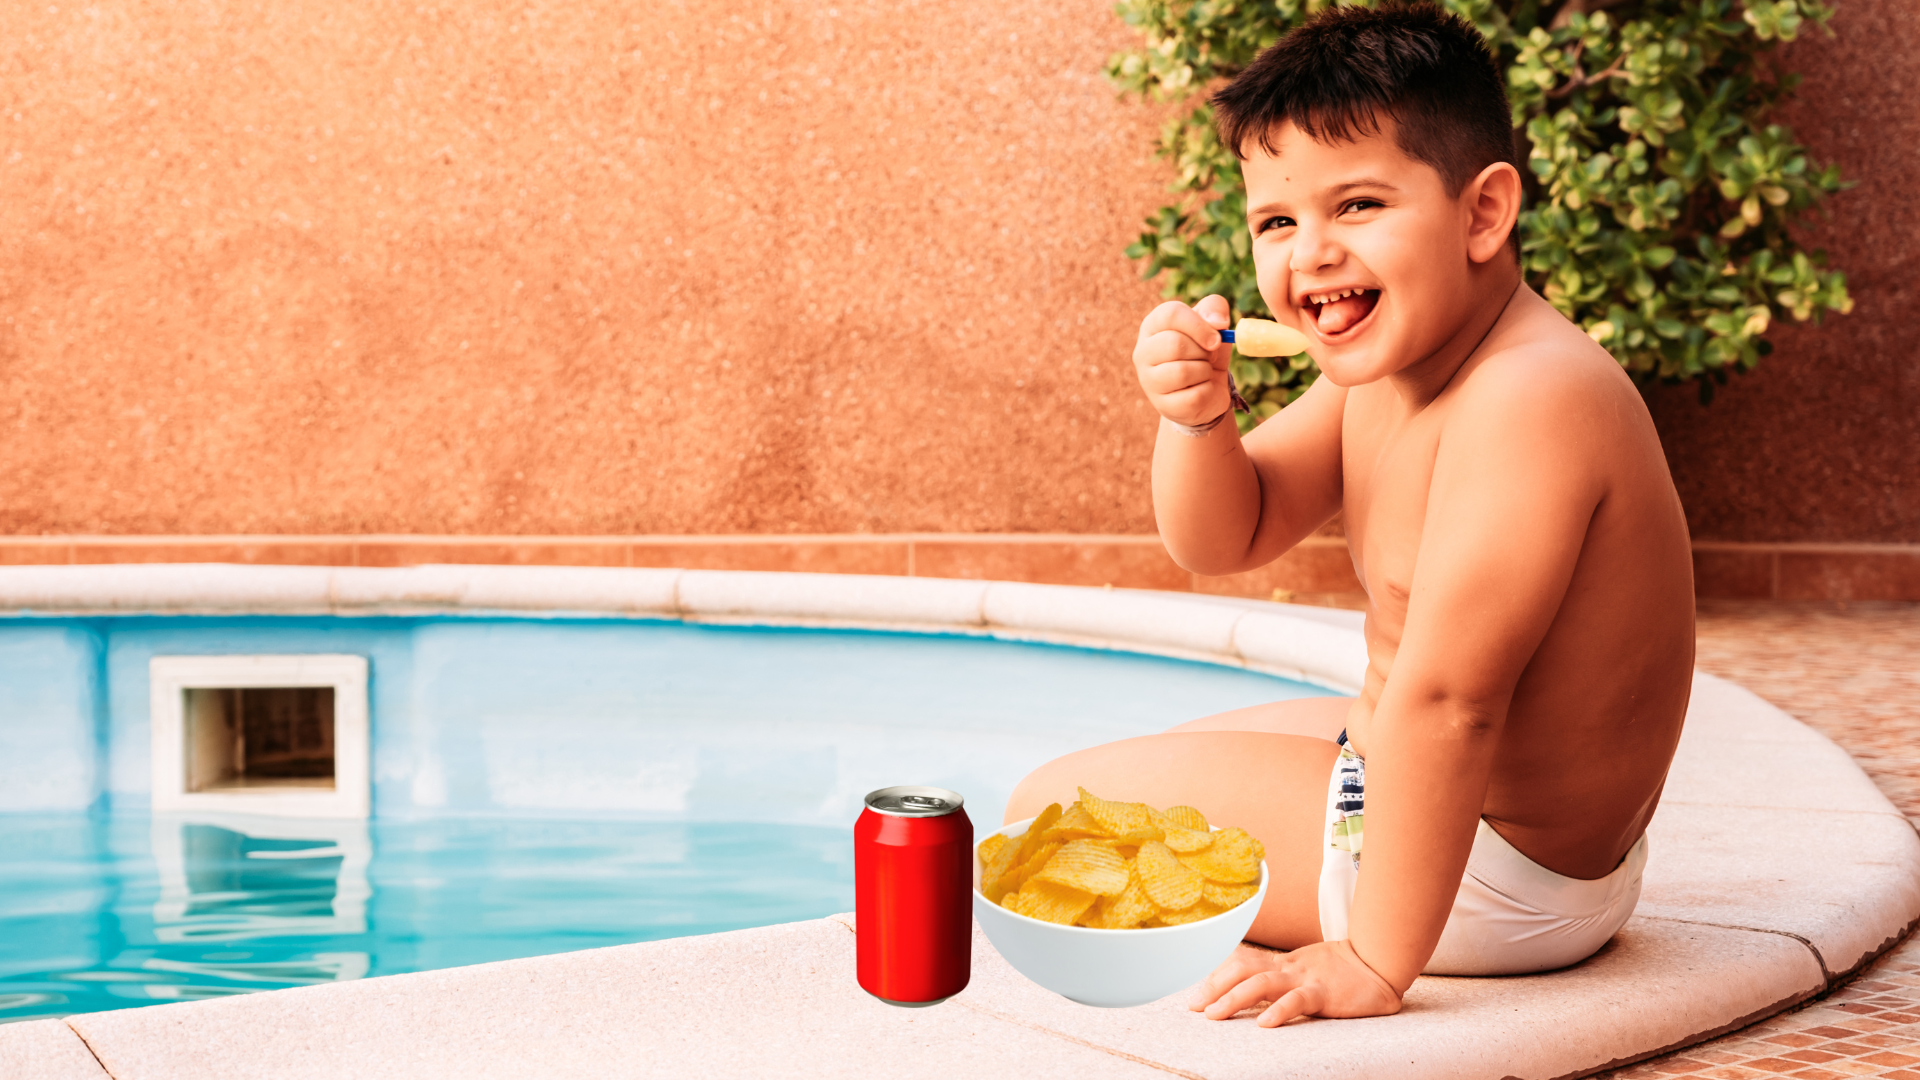 Kid eating chips by pool